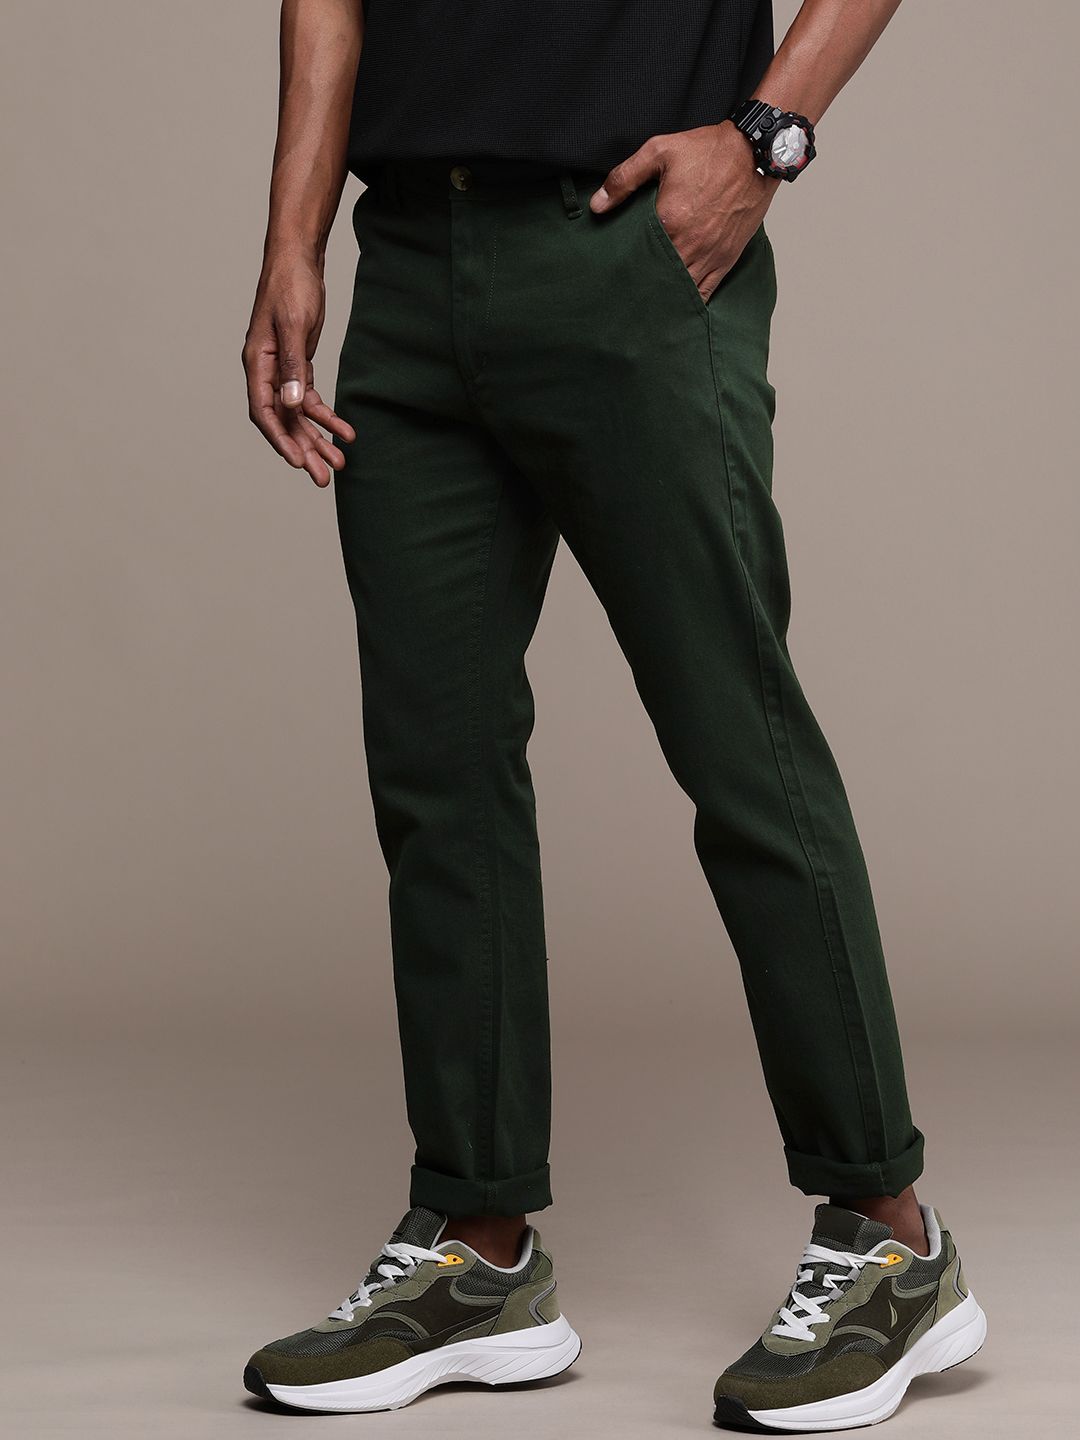 Solid Green Slim Fit Chinos Trousers